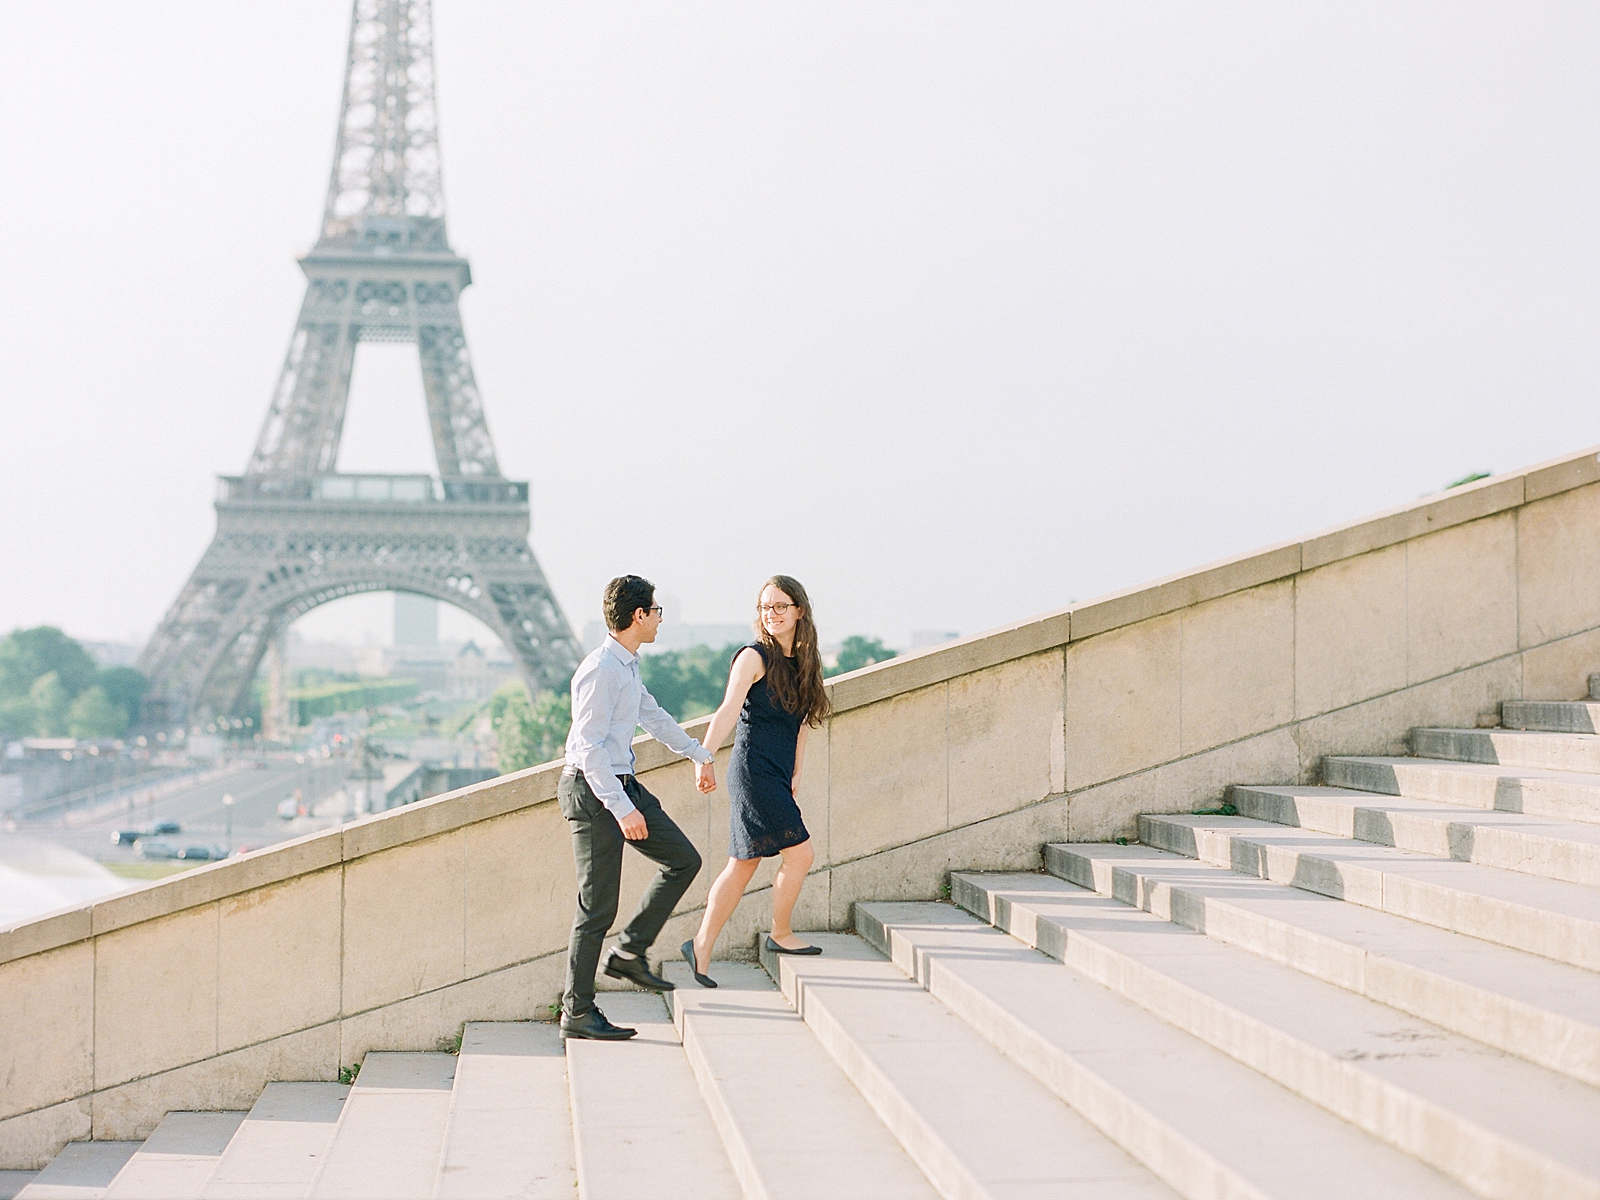 Eiffel Tower Engagement Session Couple walking up steps holding hands Photo